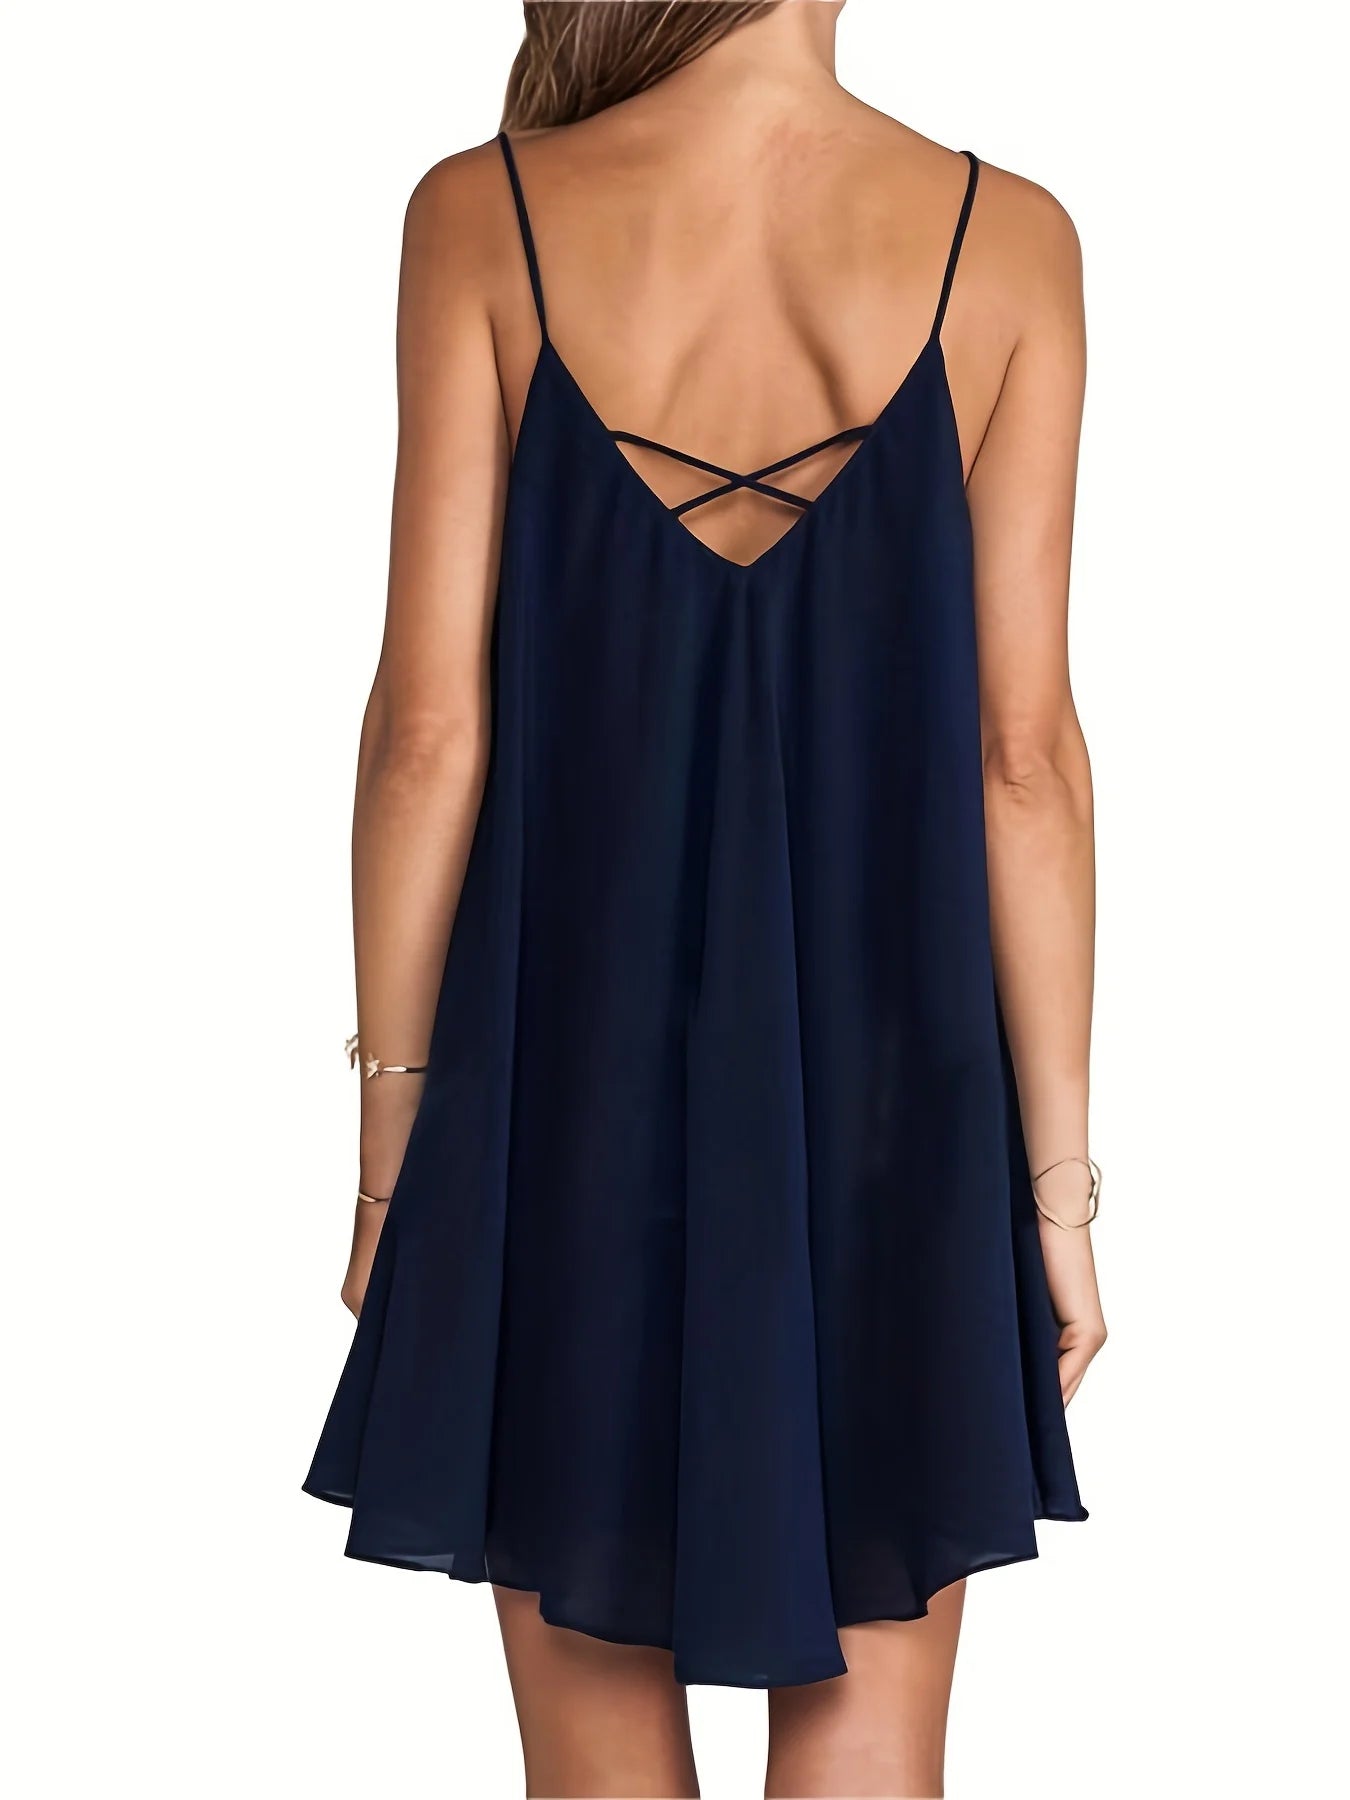 Women's Loose Backless Slip Cross Fashion Solid Color Dress